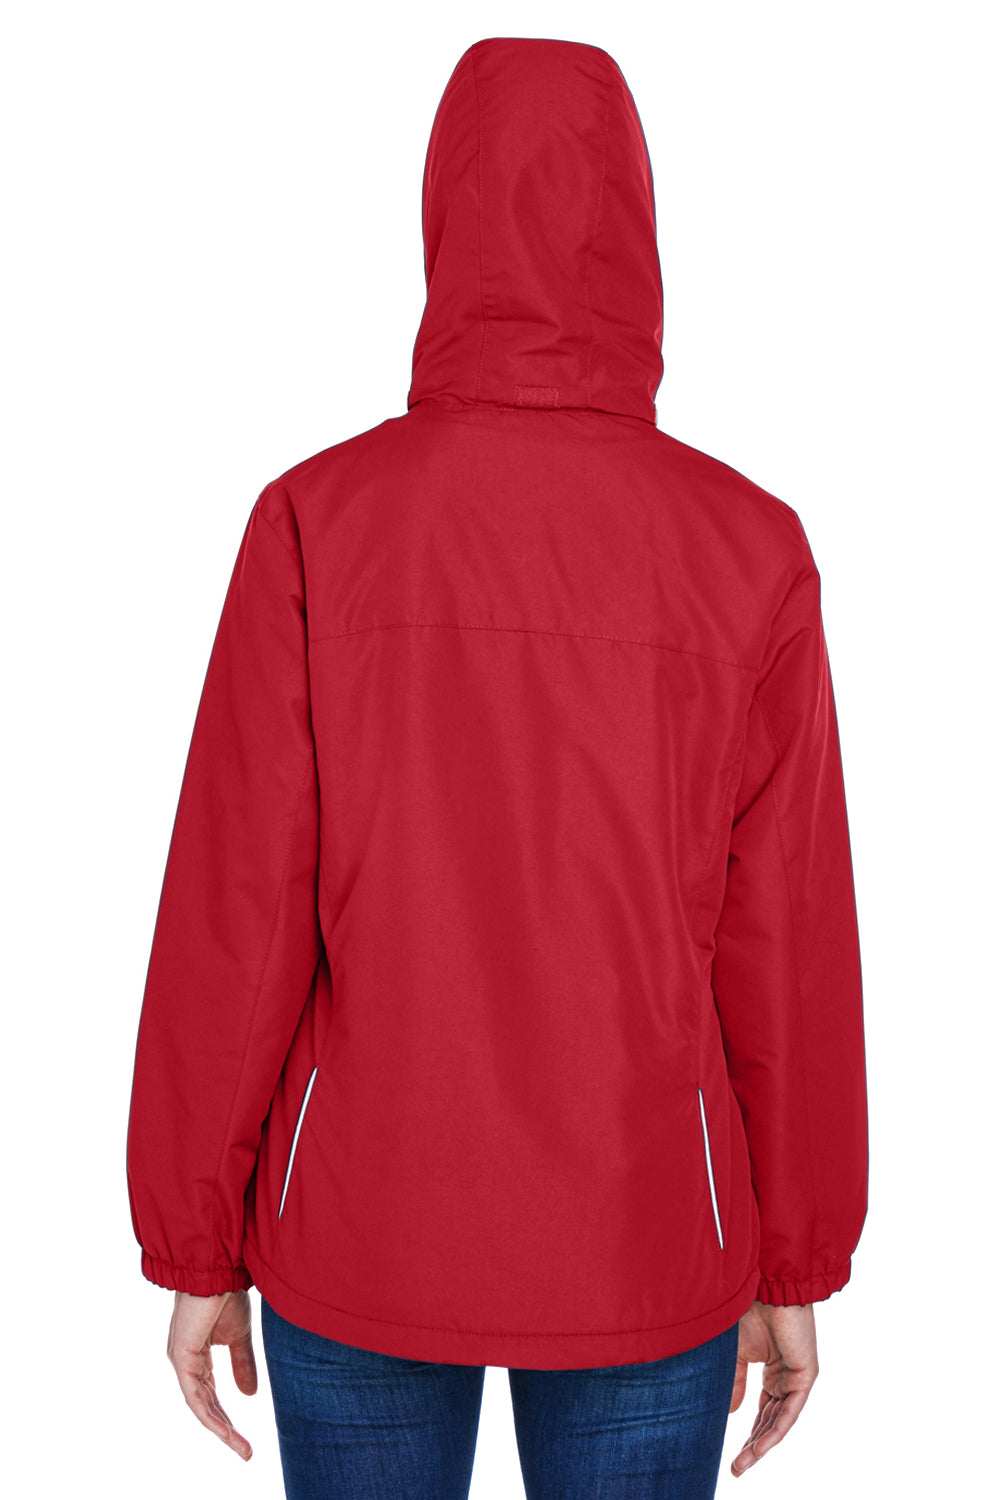 Core 365 78224 Womens Profile Water Resistant Full Zip Hooded Jacket Red Back